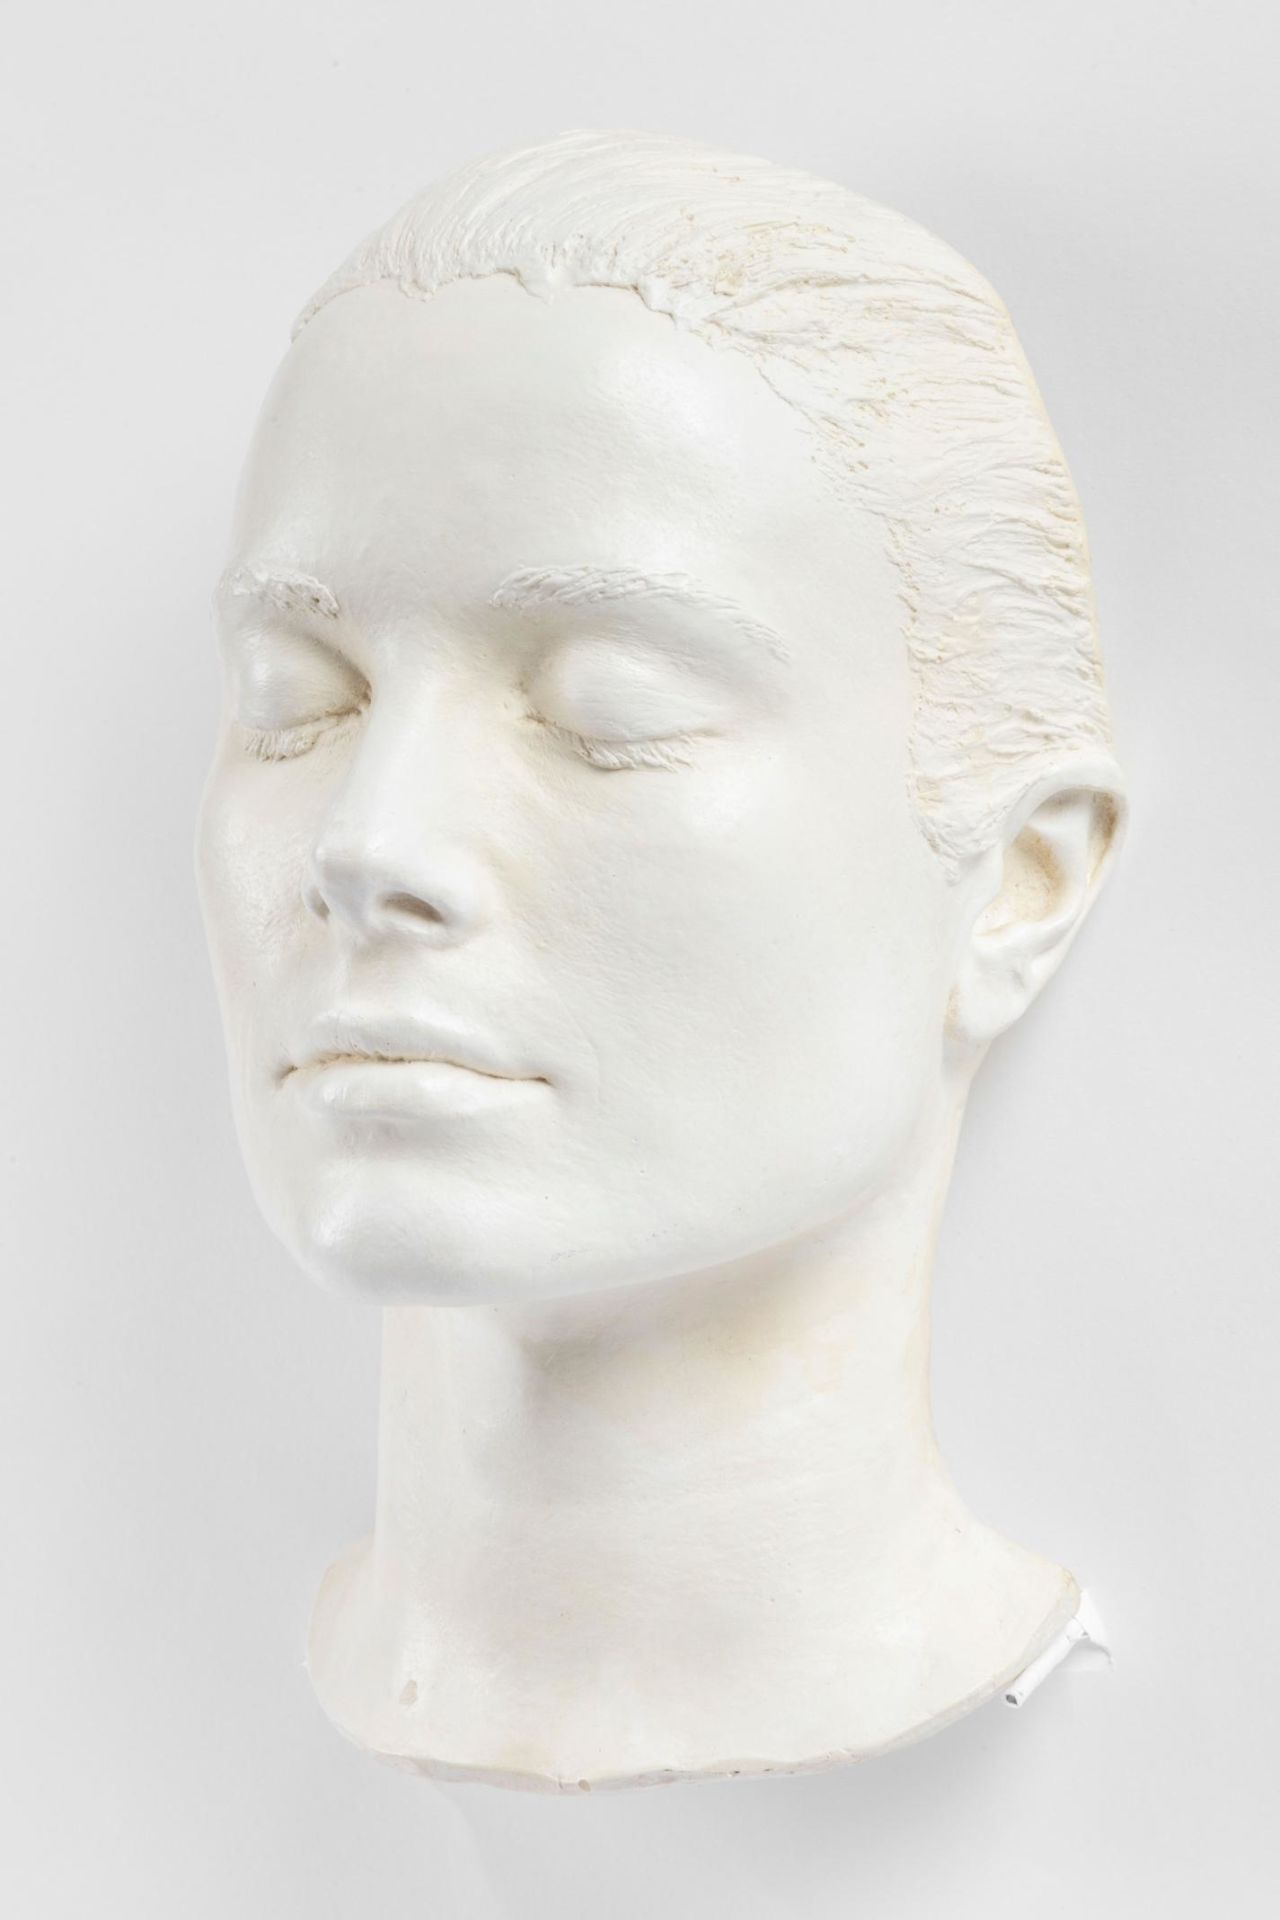 Life mask of Grace Kelly. Academy Museum of Motion Pictures.